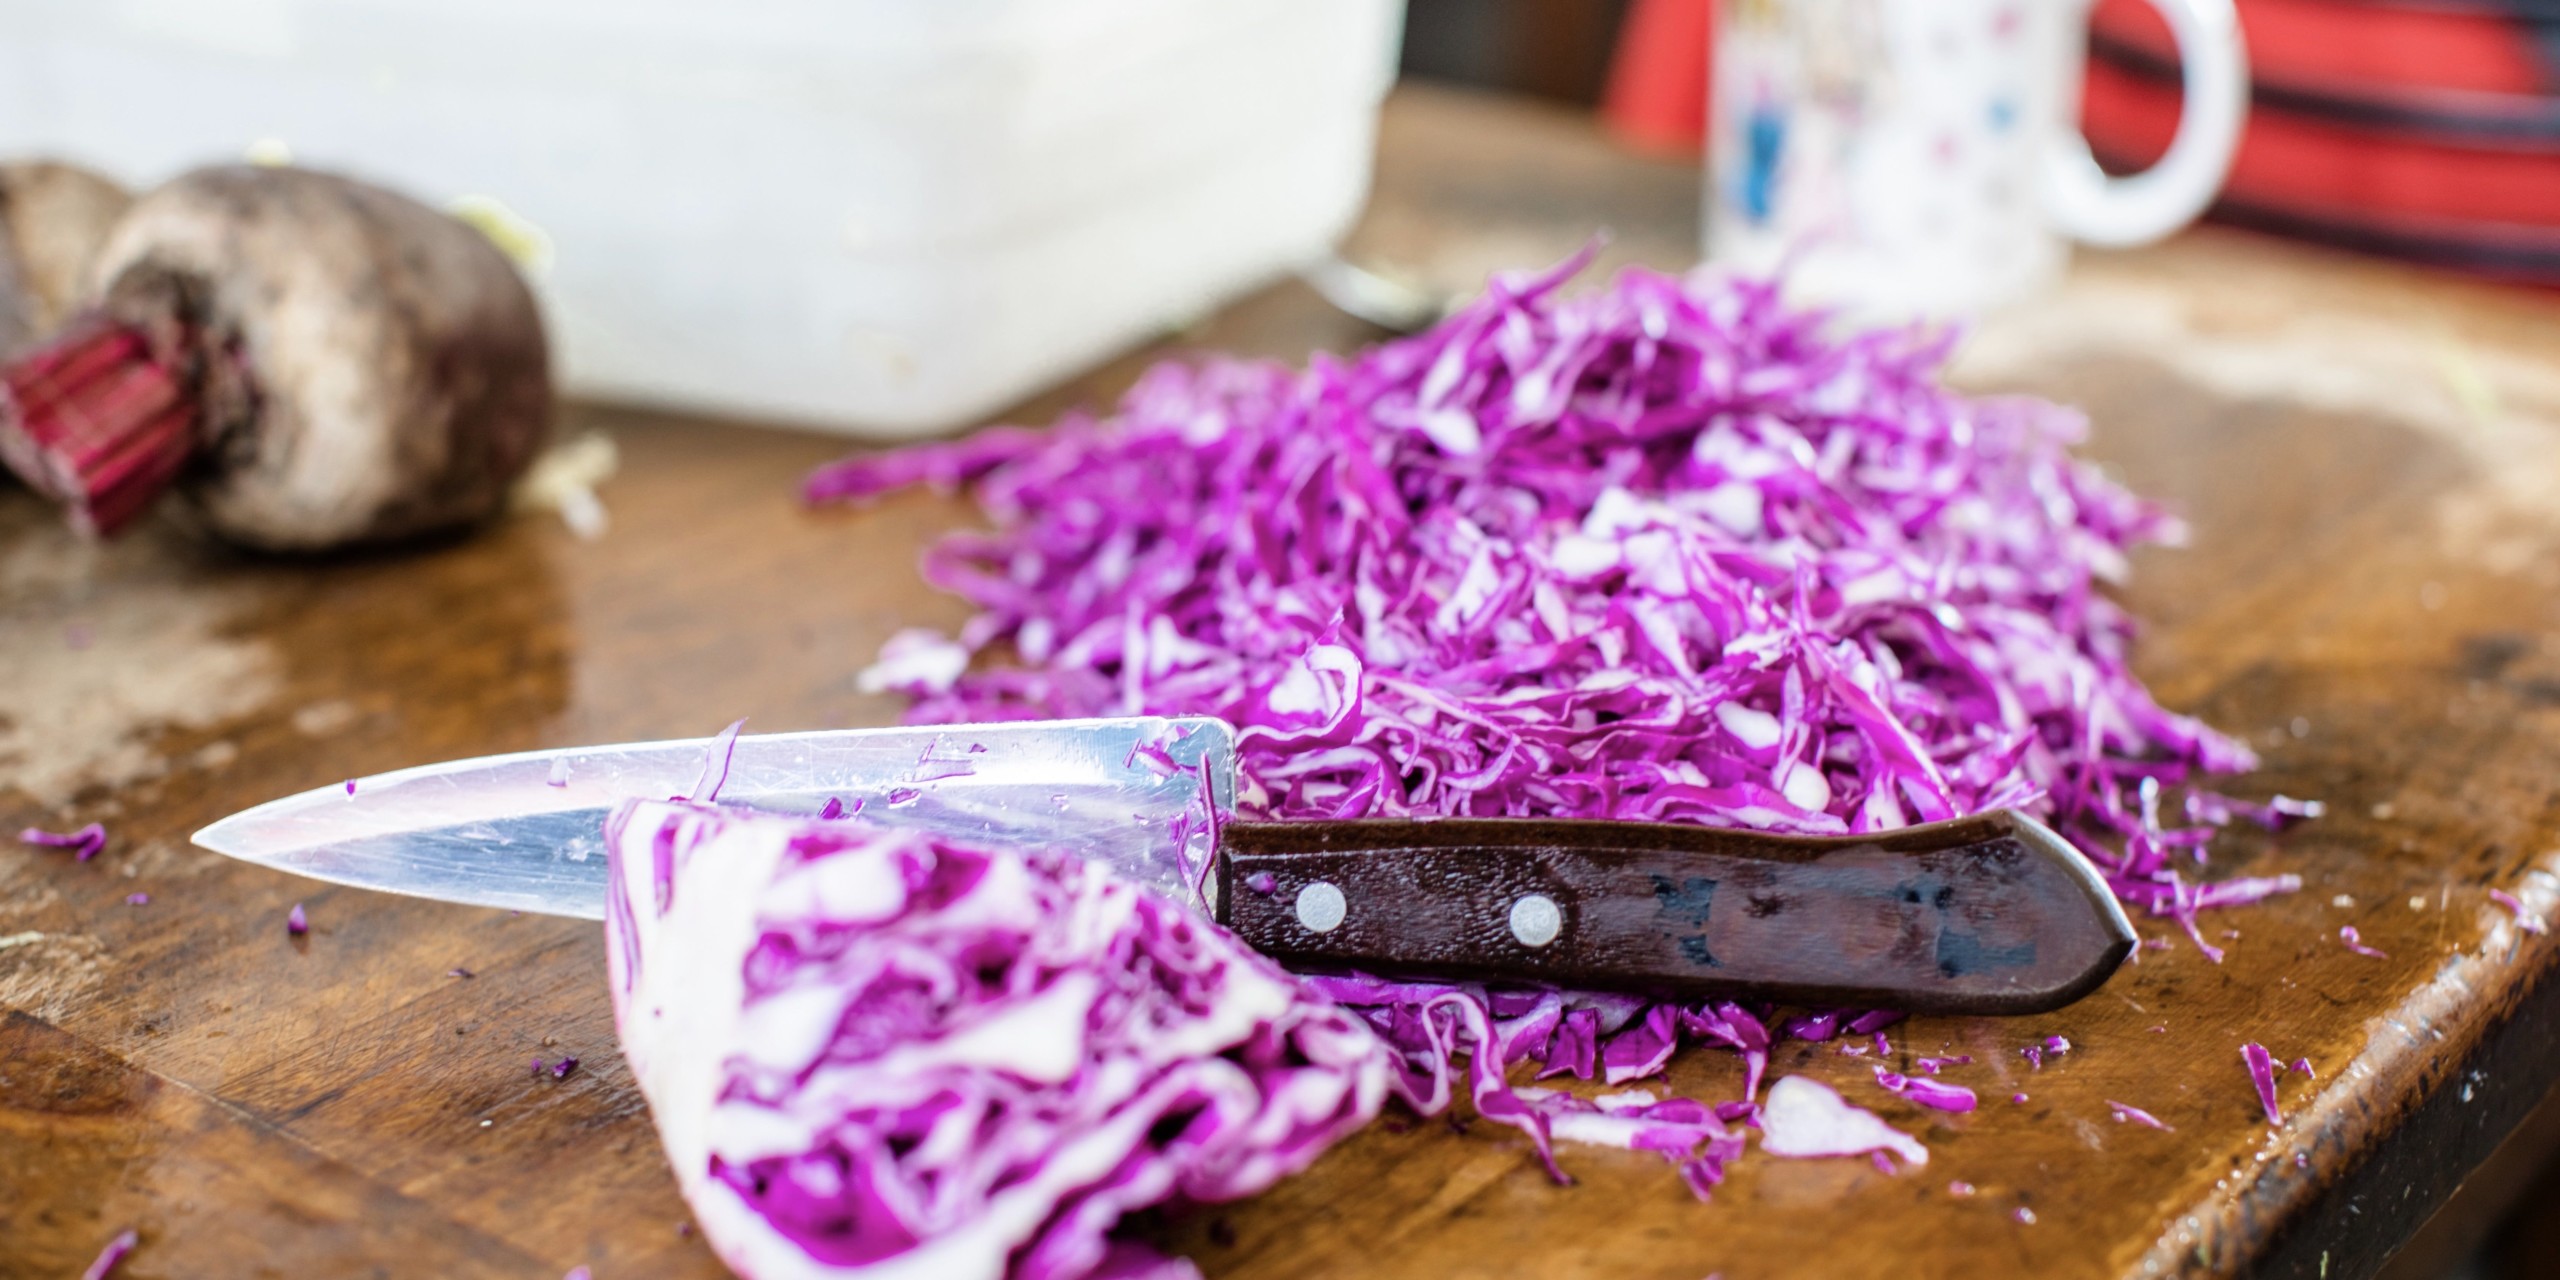 Asian pickled cabbage recipes sweet - Sex archive